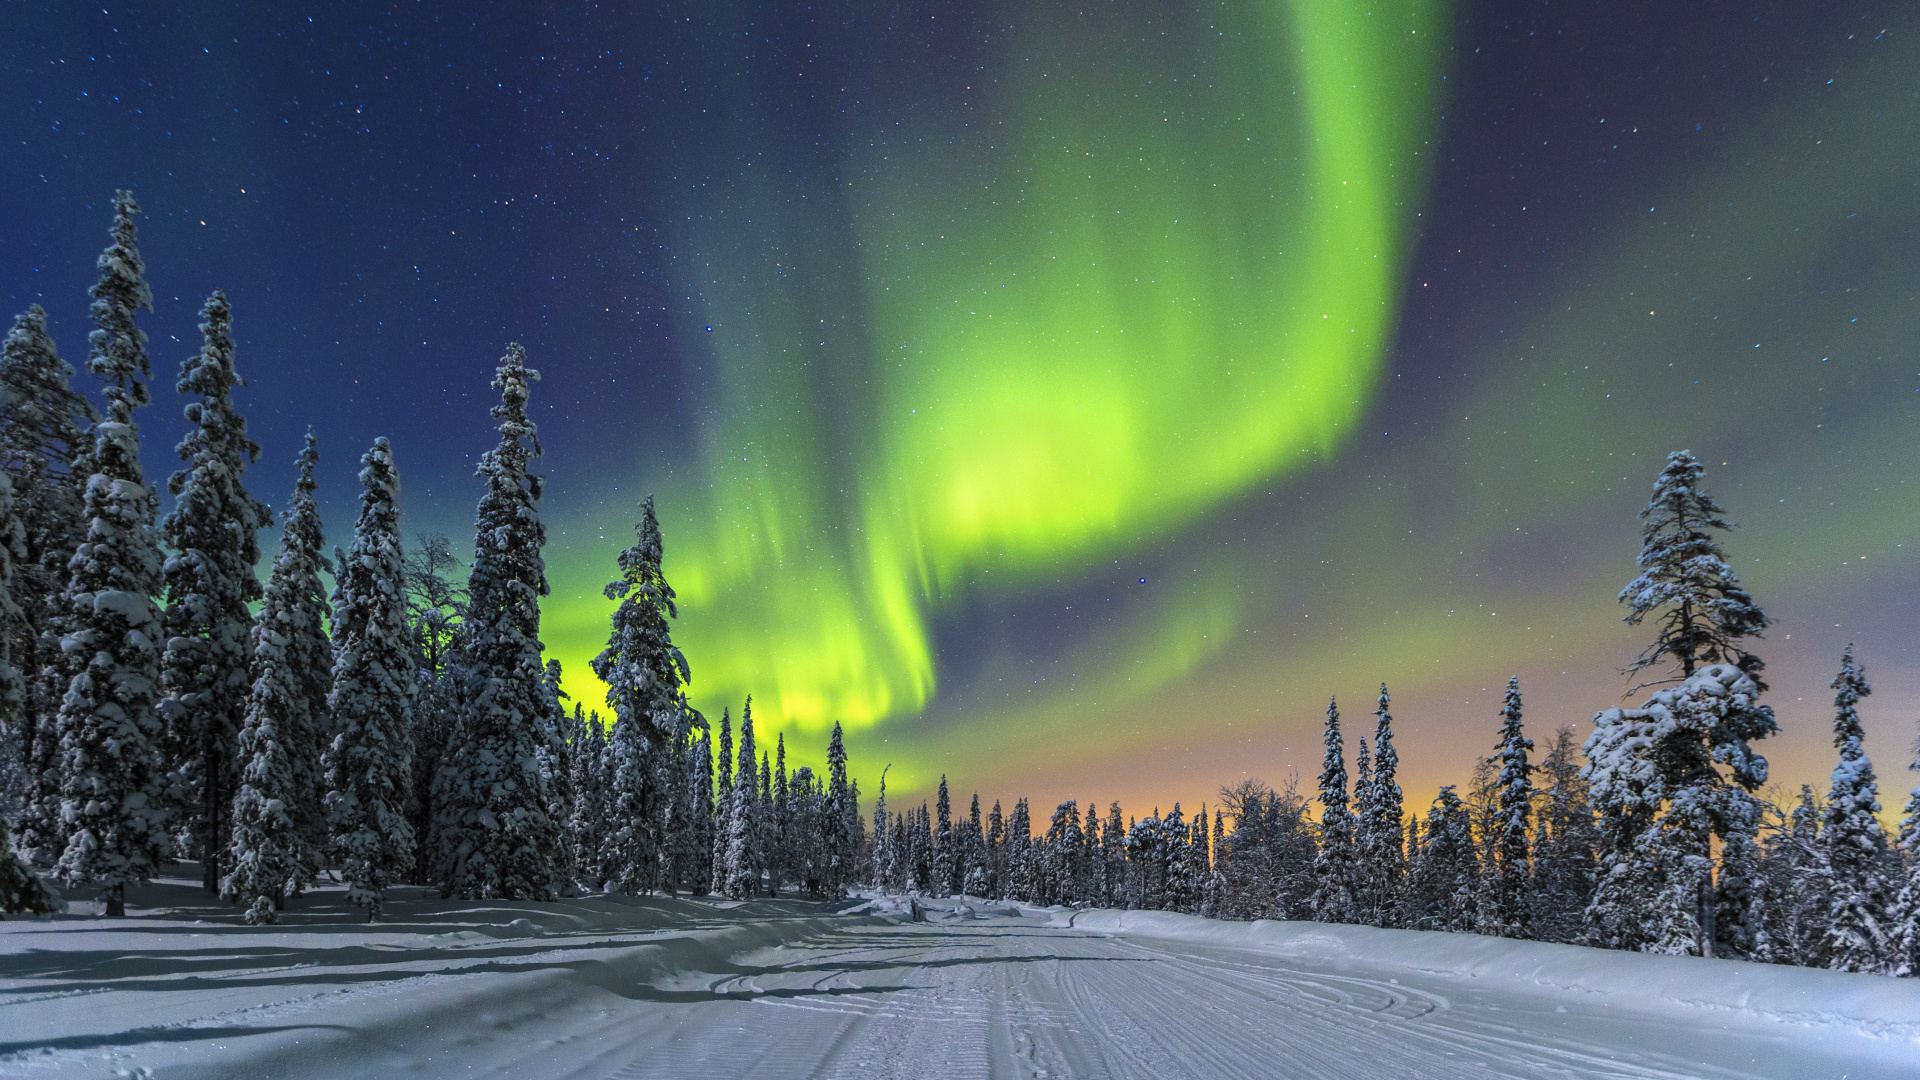 Green Aurora Lights Over Snow Covered Road During Night Time. Wallpaper in 1920x1080 Resolution